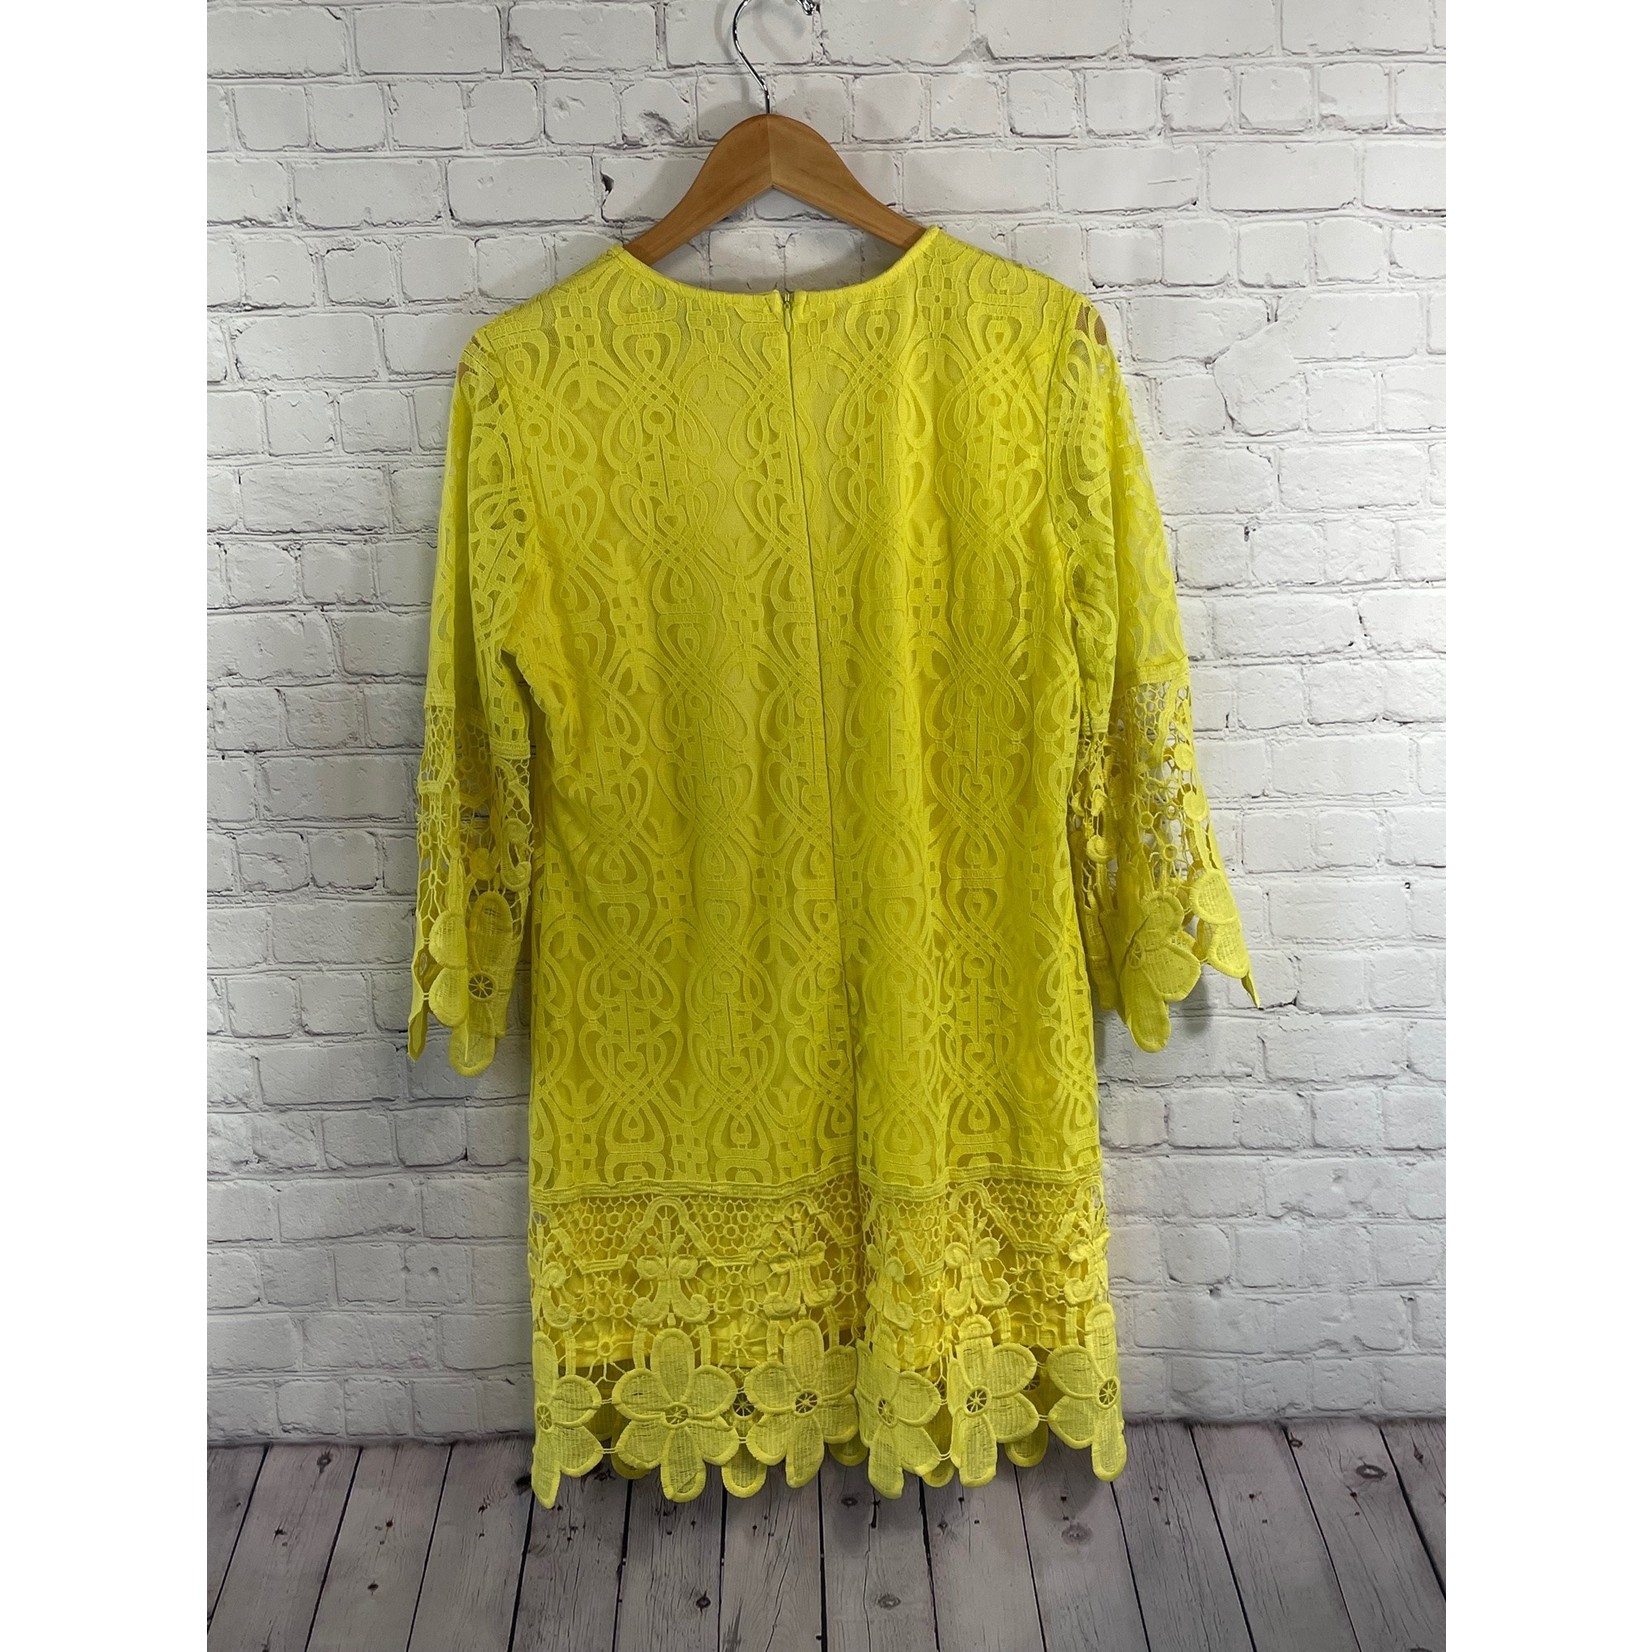 J.Gee J.Gee, Yellow, Lace, Dress, Large